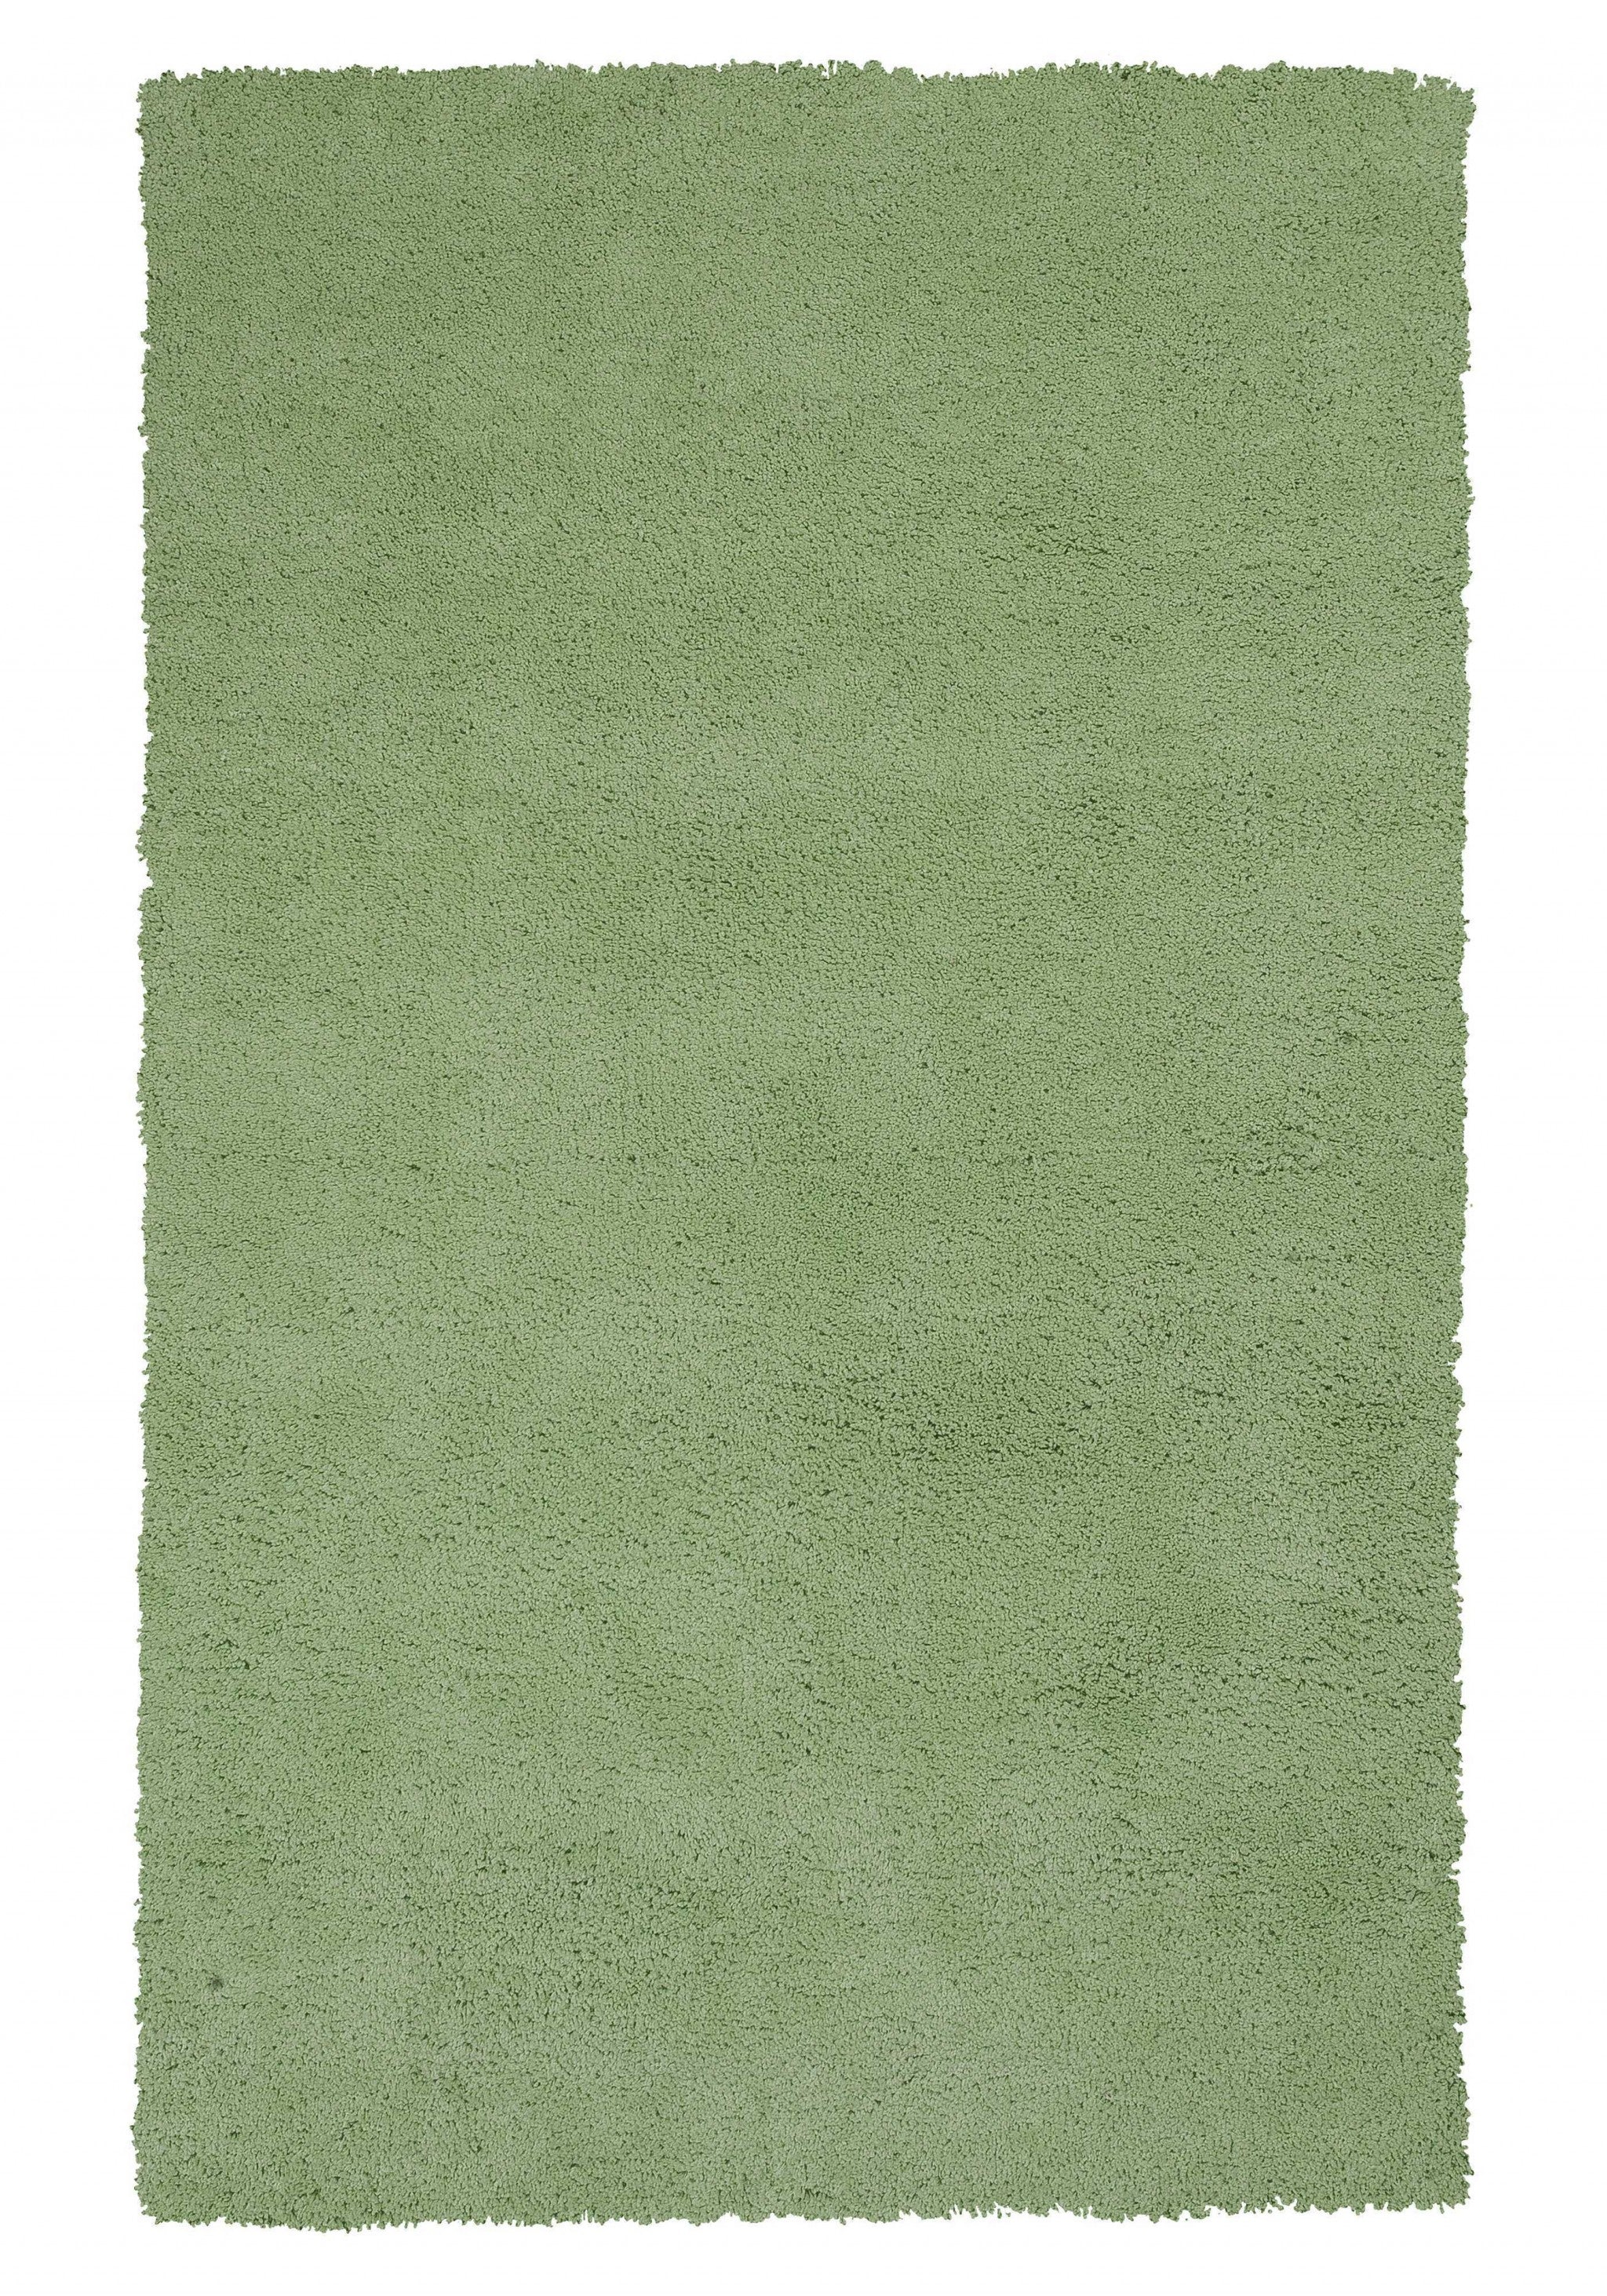 8' x 10' Polyester Spearmint Green Area Rug